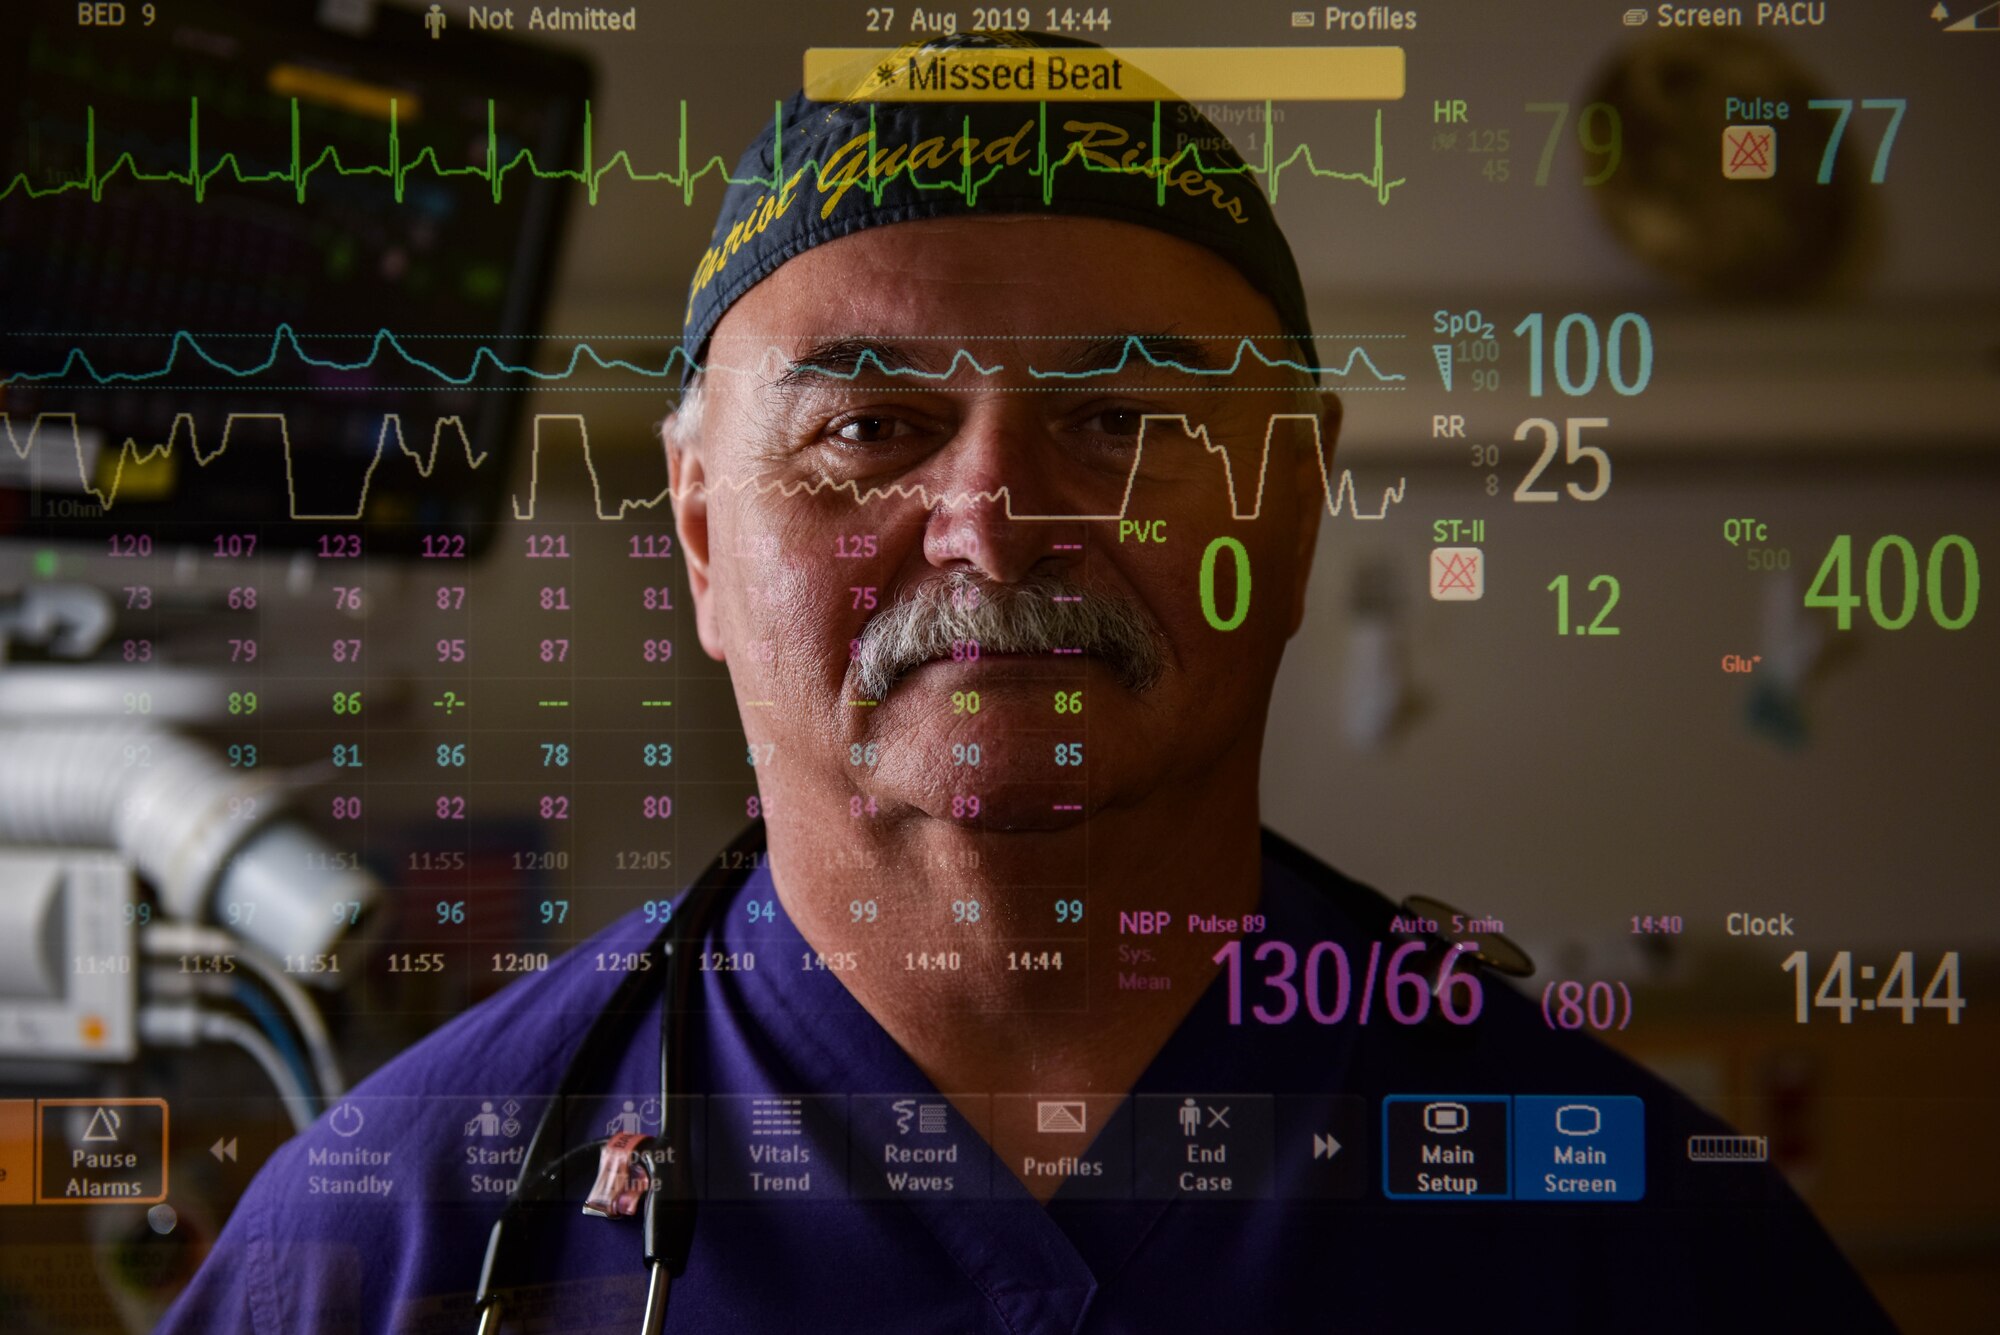 Jeffrey Barbour, 633rd Medical Group same day surgery and post anesthesia unit, poses for a photo at Joint Base Langley-Eustis, Virginia, Aug. 16, 2019. Barbour became a first responder when he was 15-years-old and has been a nurse for over 40 years. (U.S. Air Force photo by Airman 1st Class Sarah Dowe)